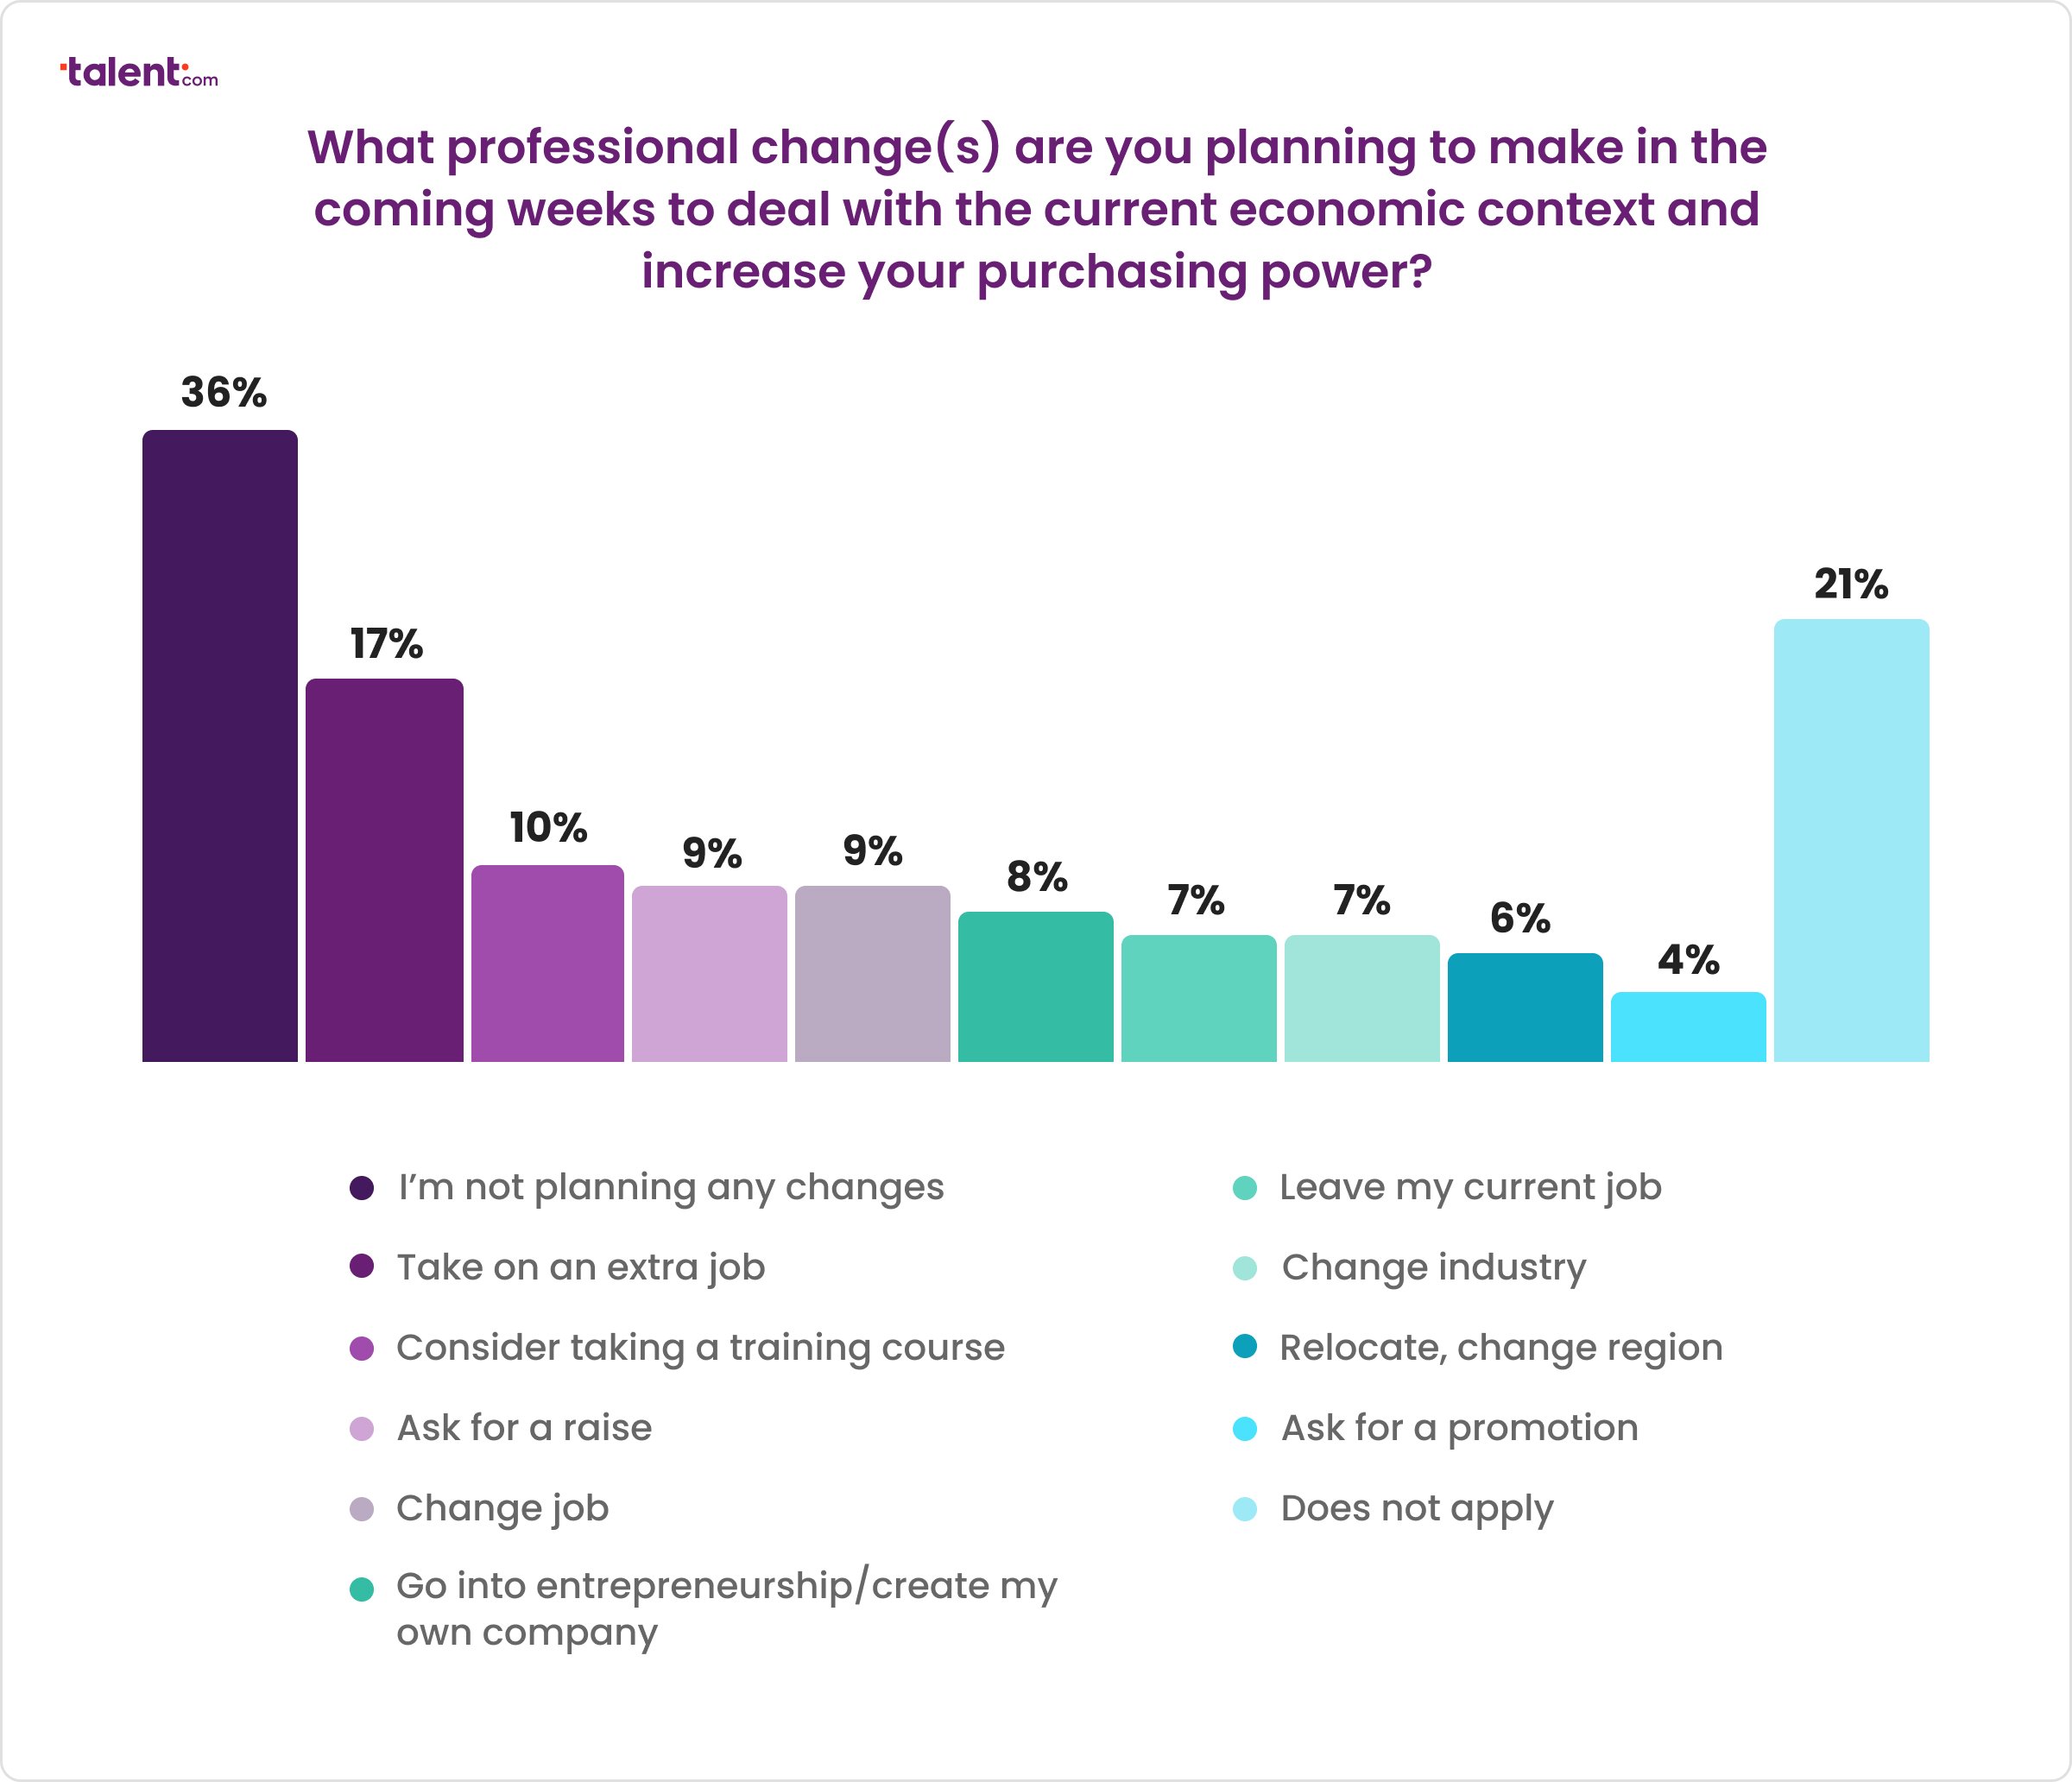 Professional changes to increase purchasing power